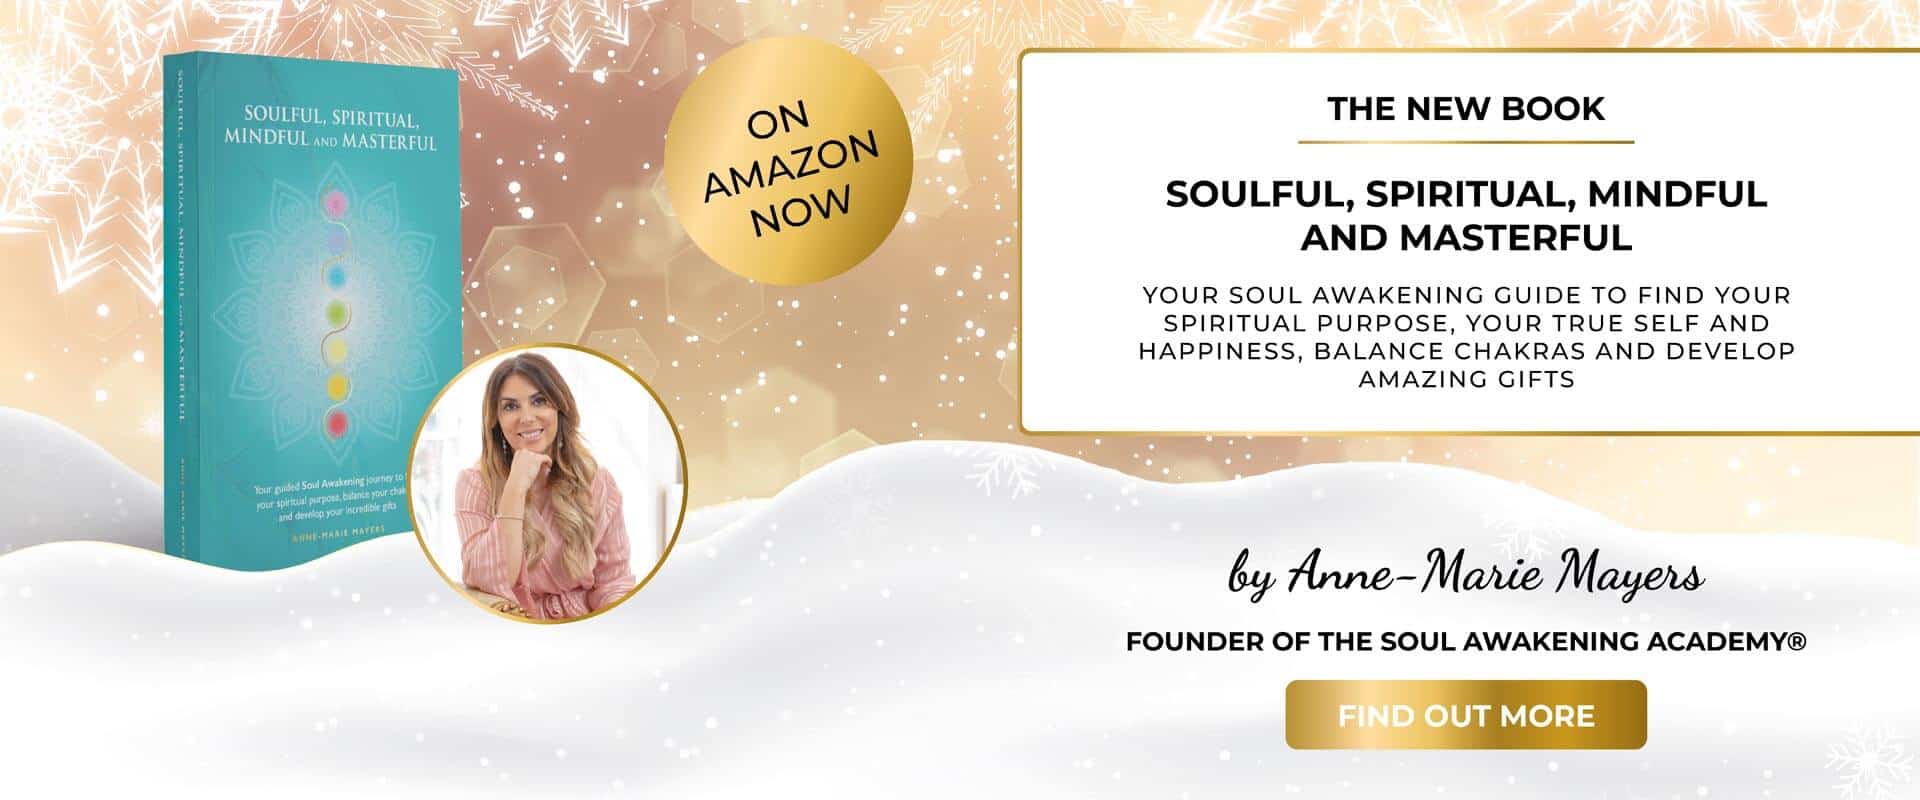 Soulful, Spiritual, Mindful and Masterful book by Anne-Marie Mayers | Soul Awakening Academy